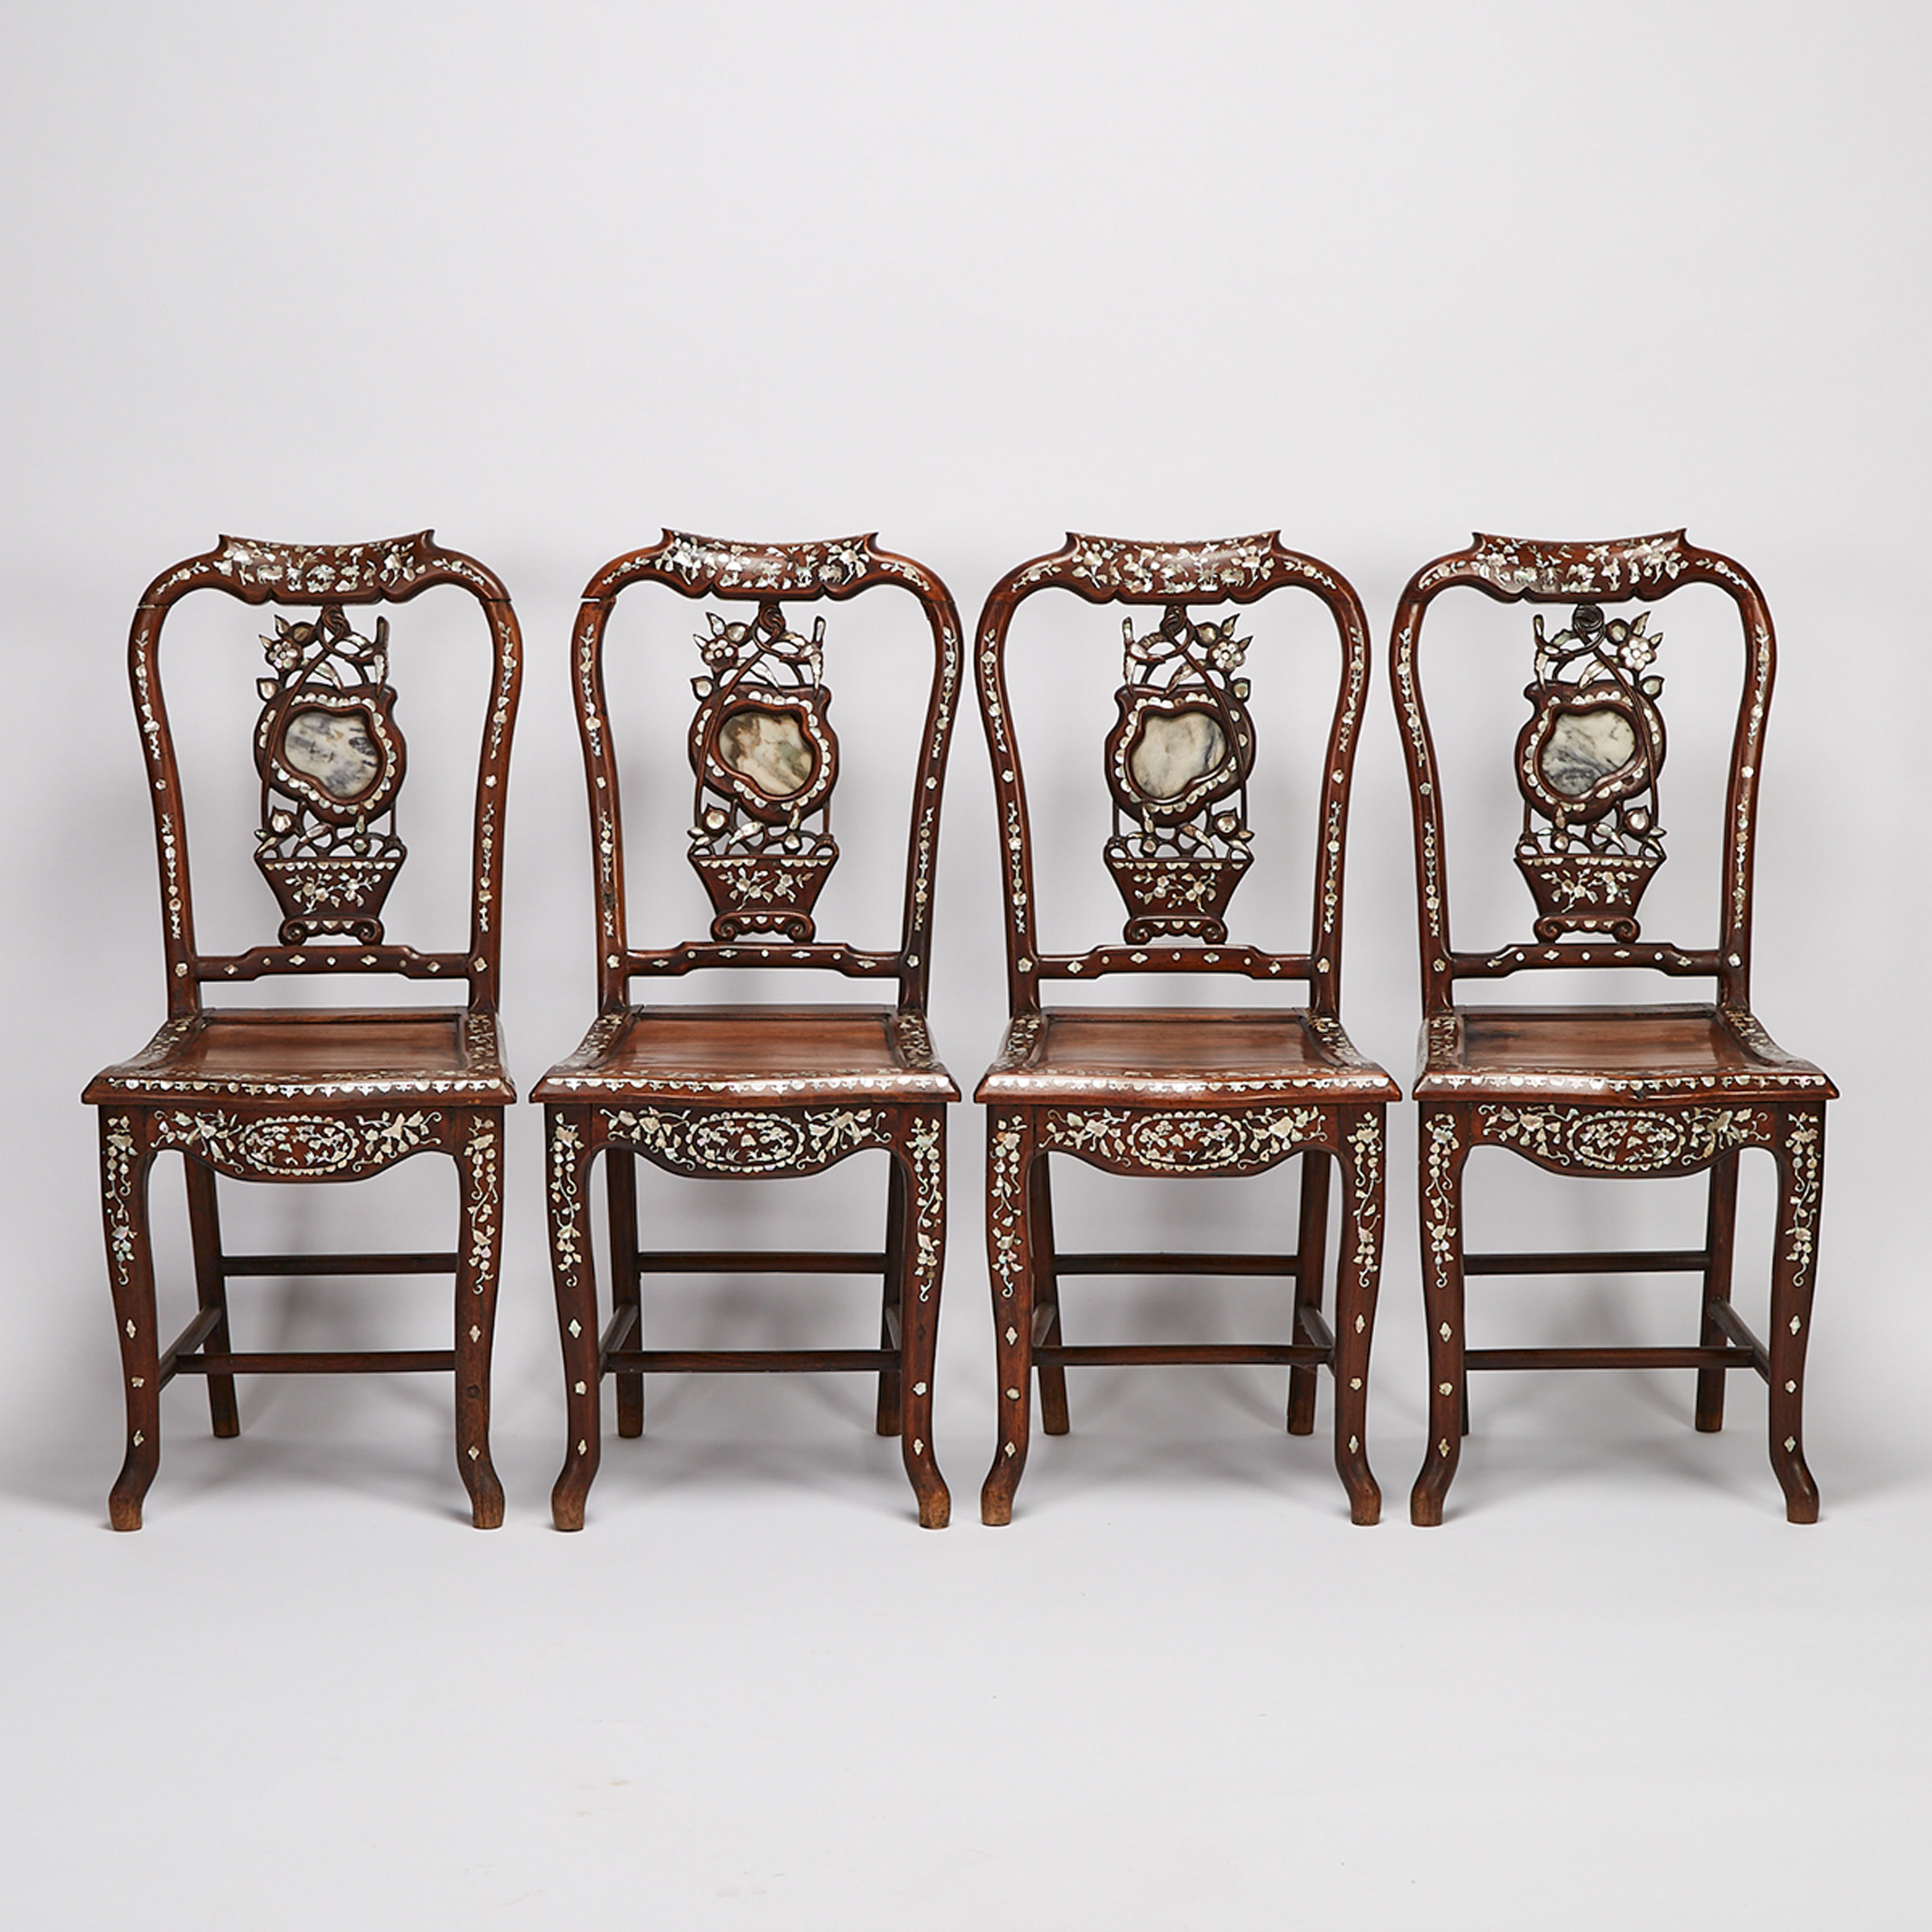 A Set of Four Mother-of-Pearl Inlaid Suanzhi Chairs, Early 20th Century